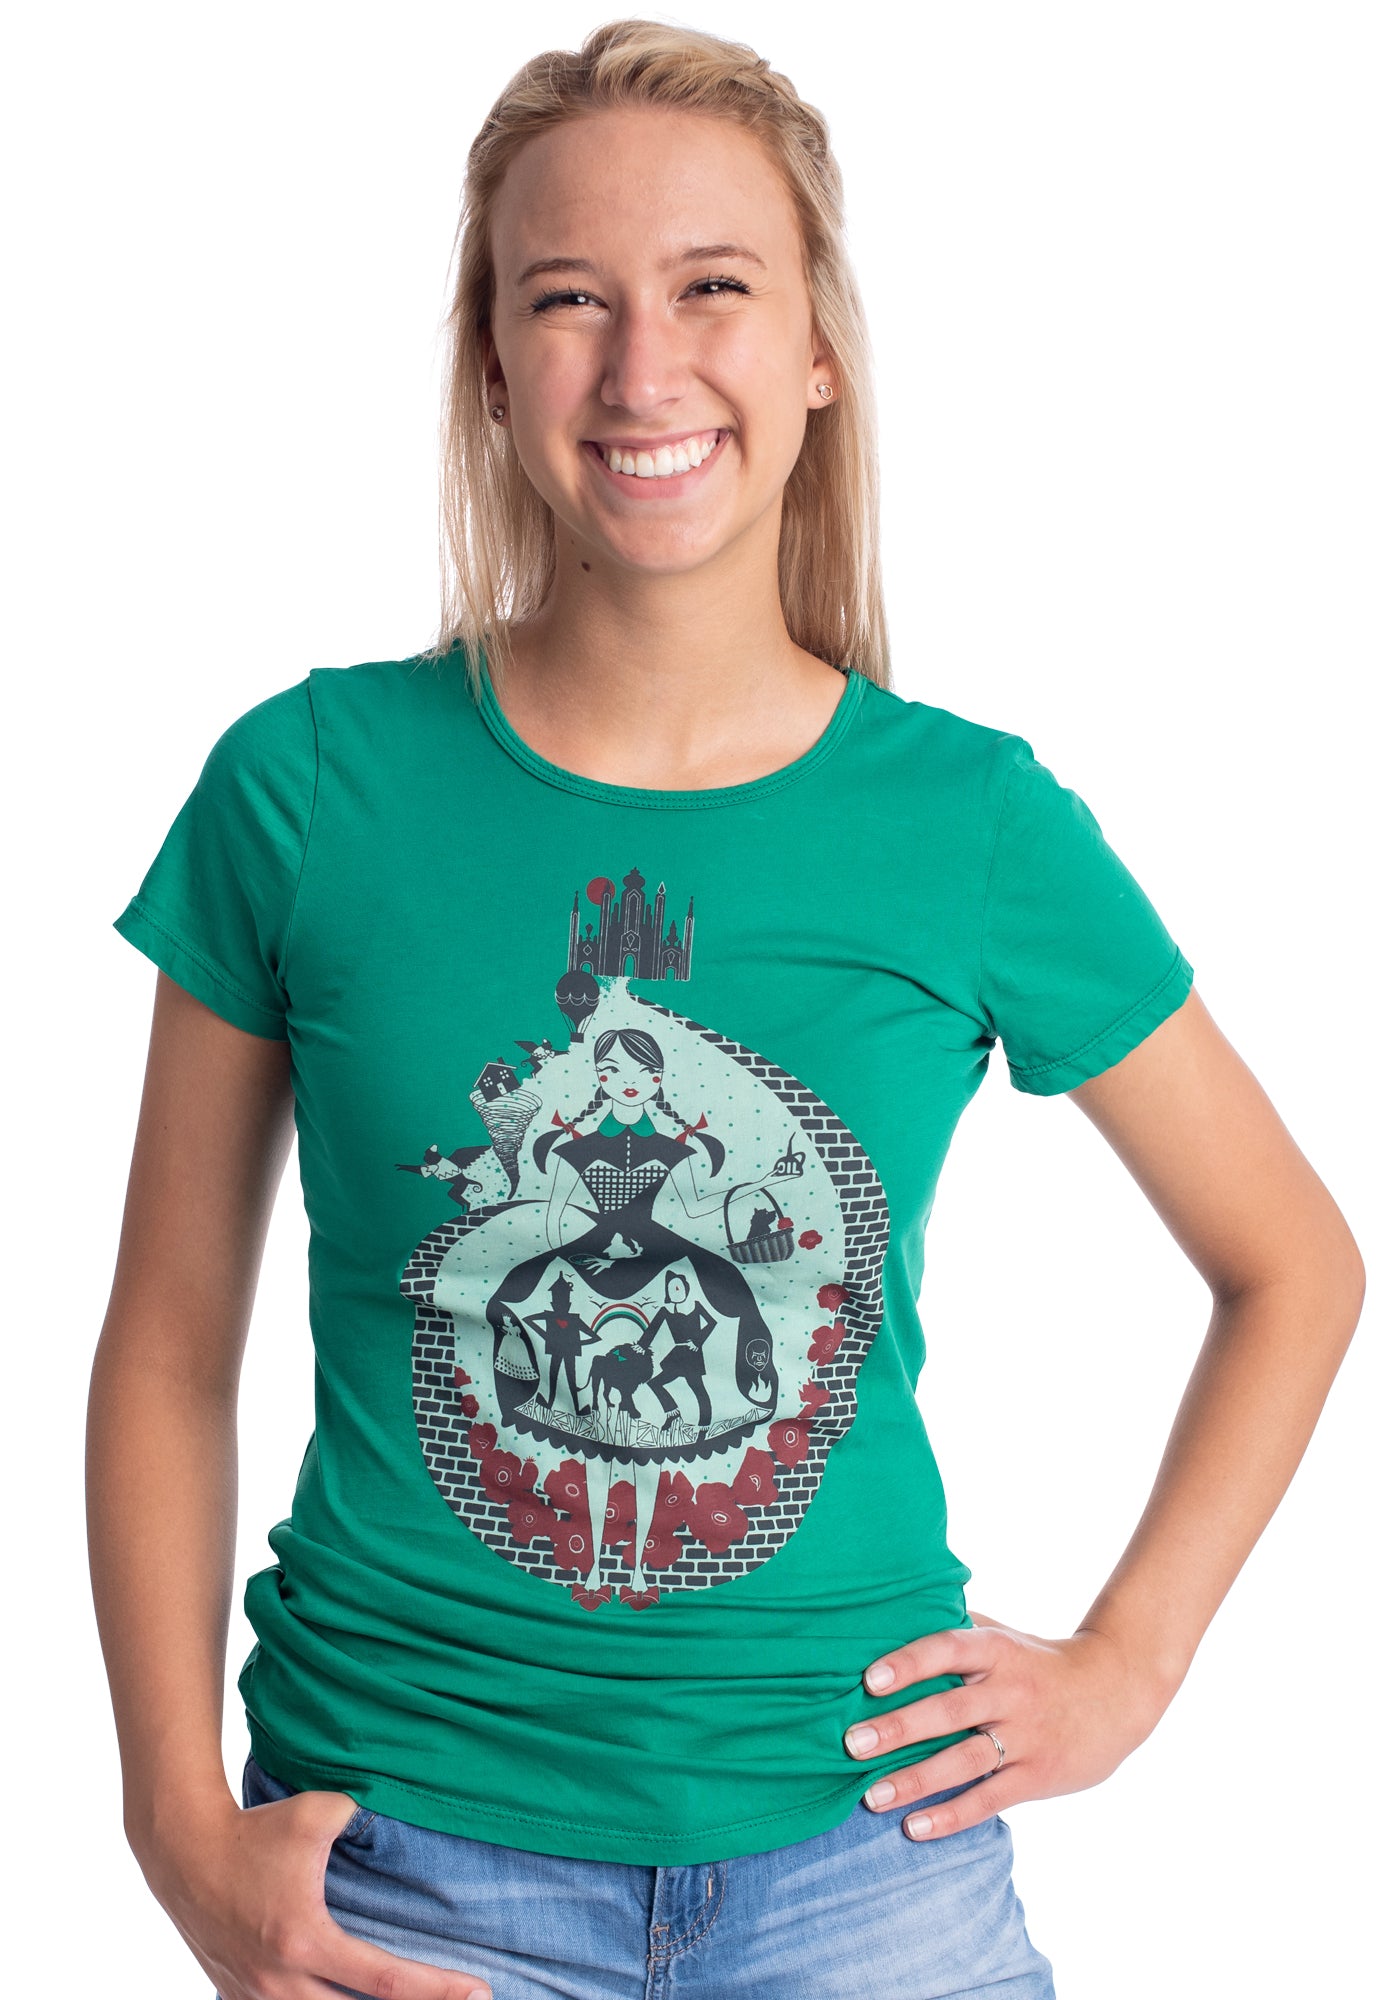 Emerald green tee with graphic of Dorothy, dog, scarecrow, lion, tin man and poppies in red and white